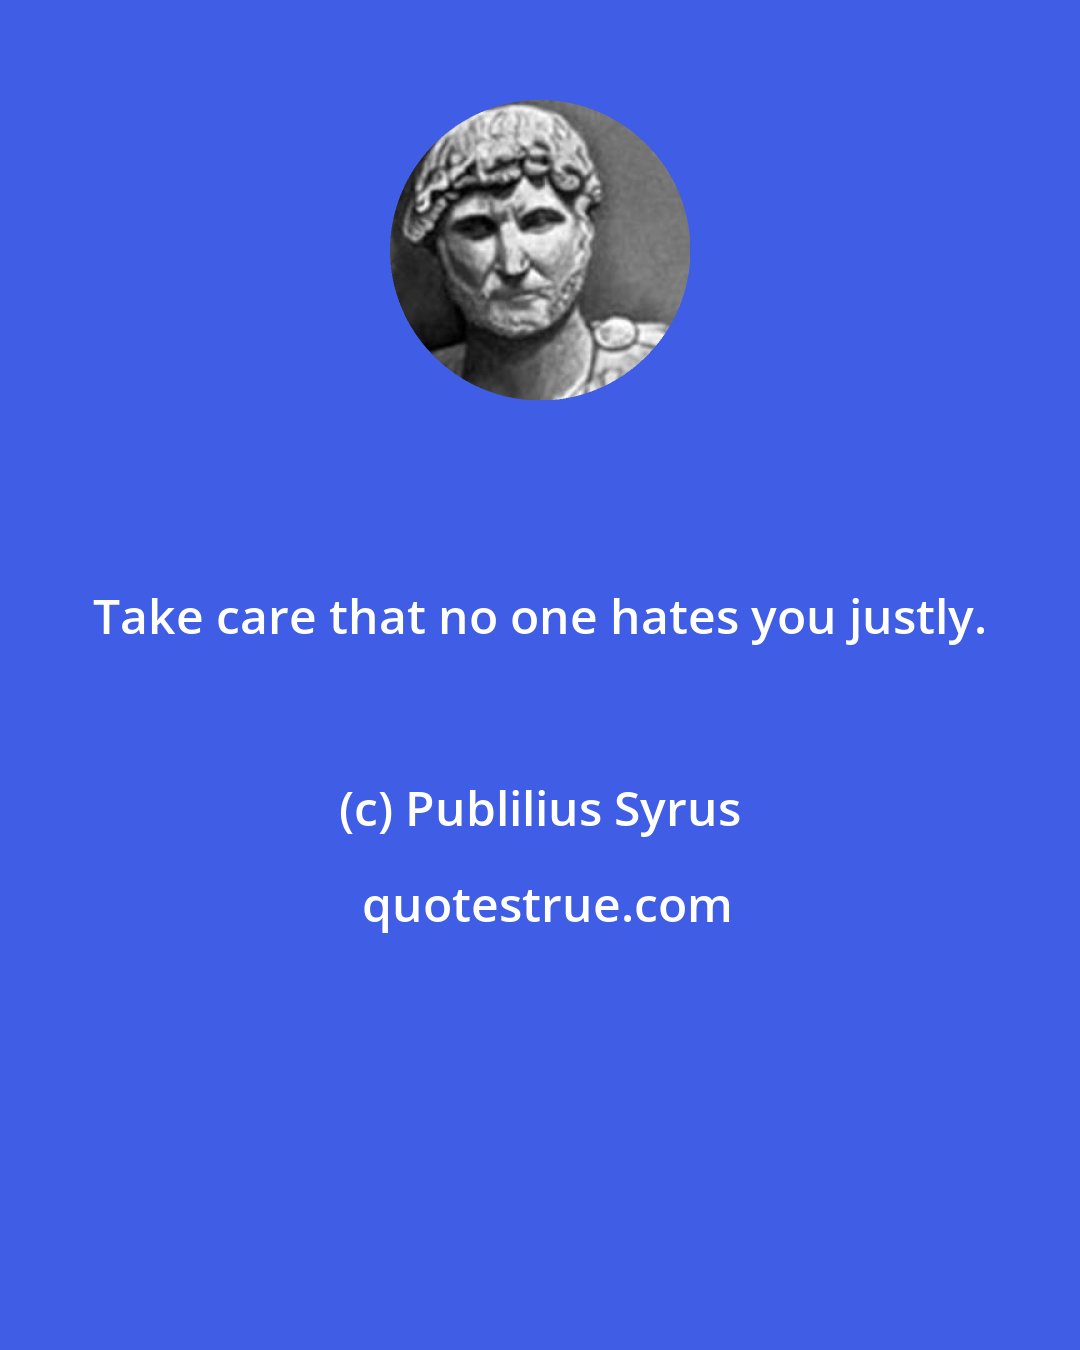 Publilius Syrus: Take care that no one hates you justly.